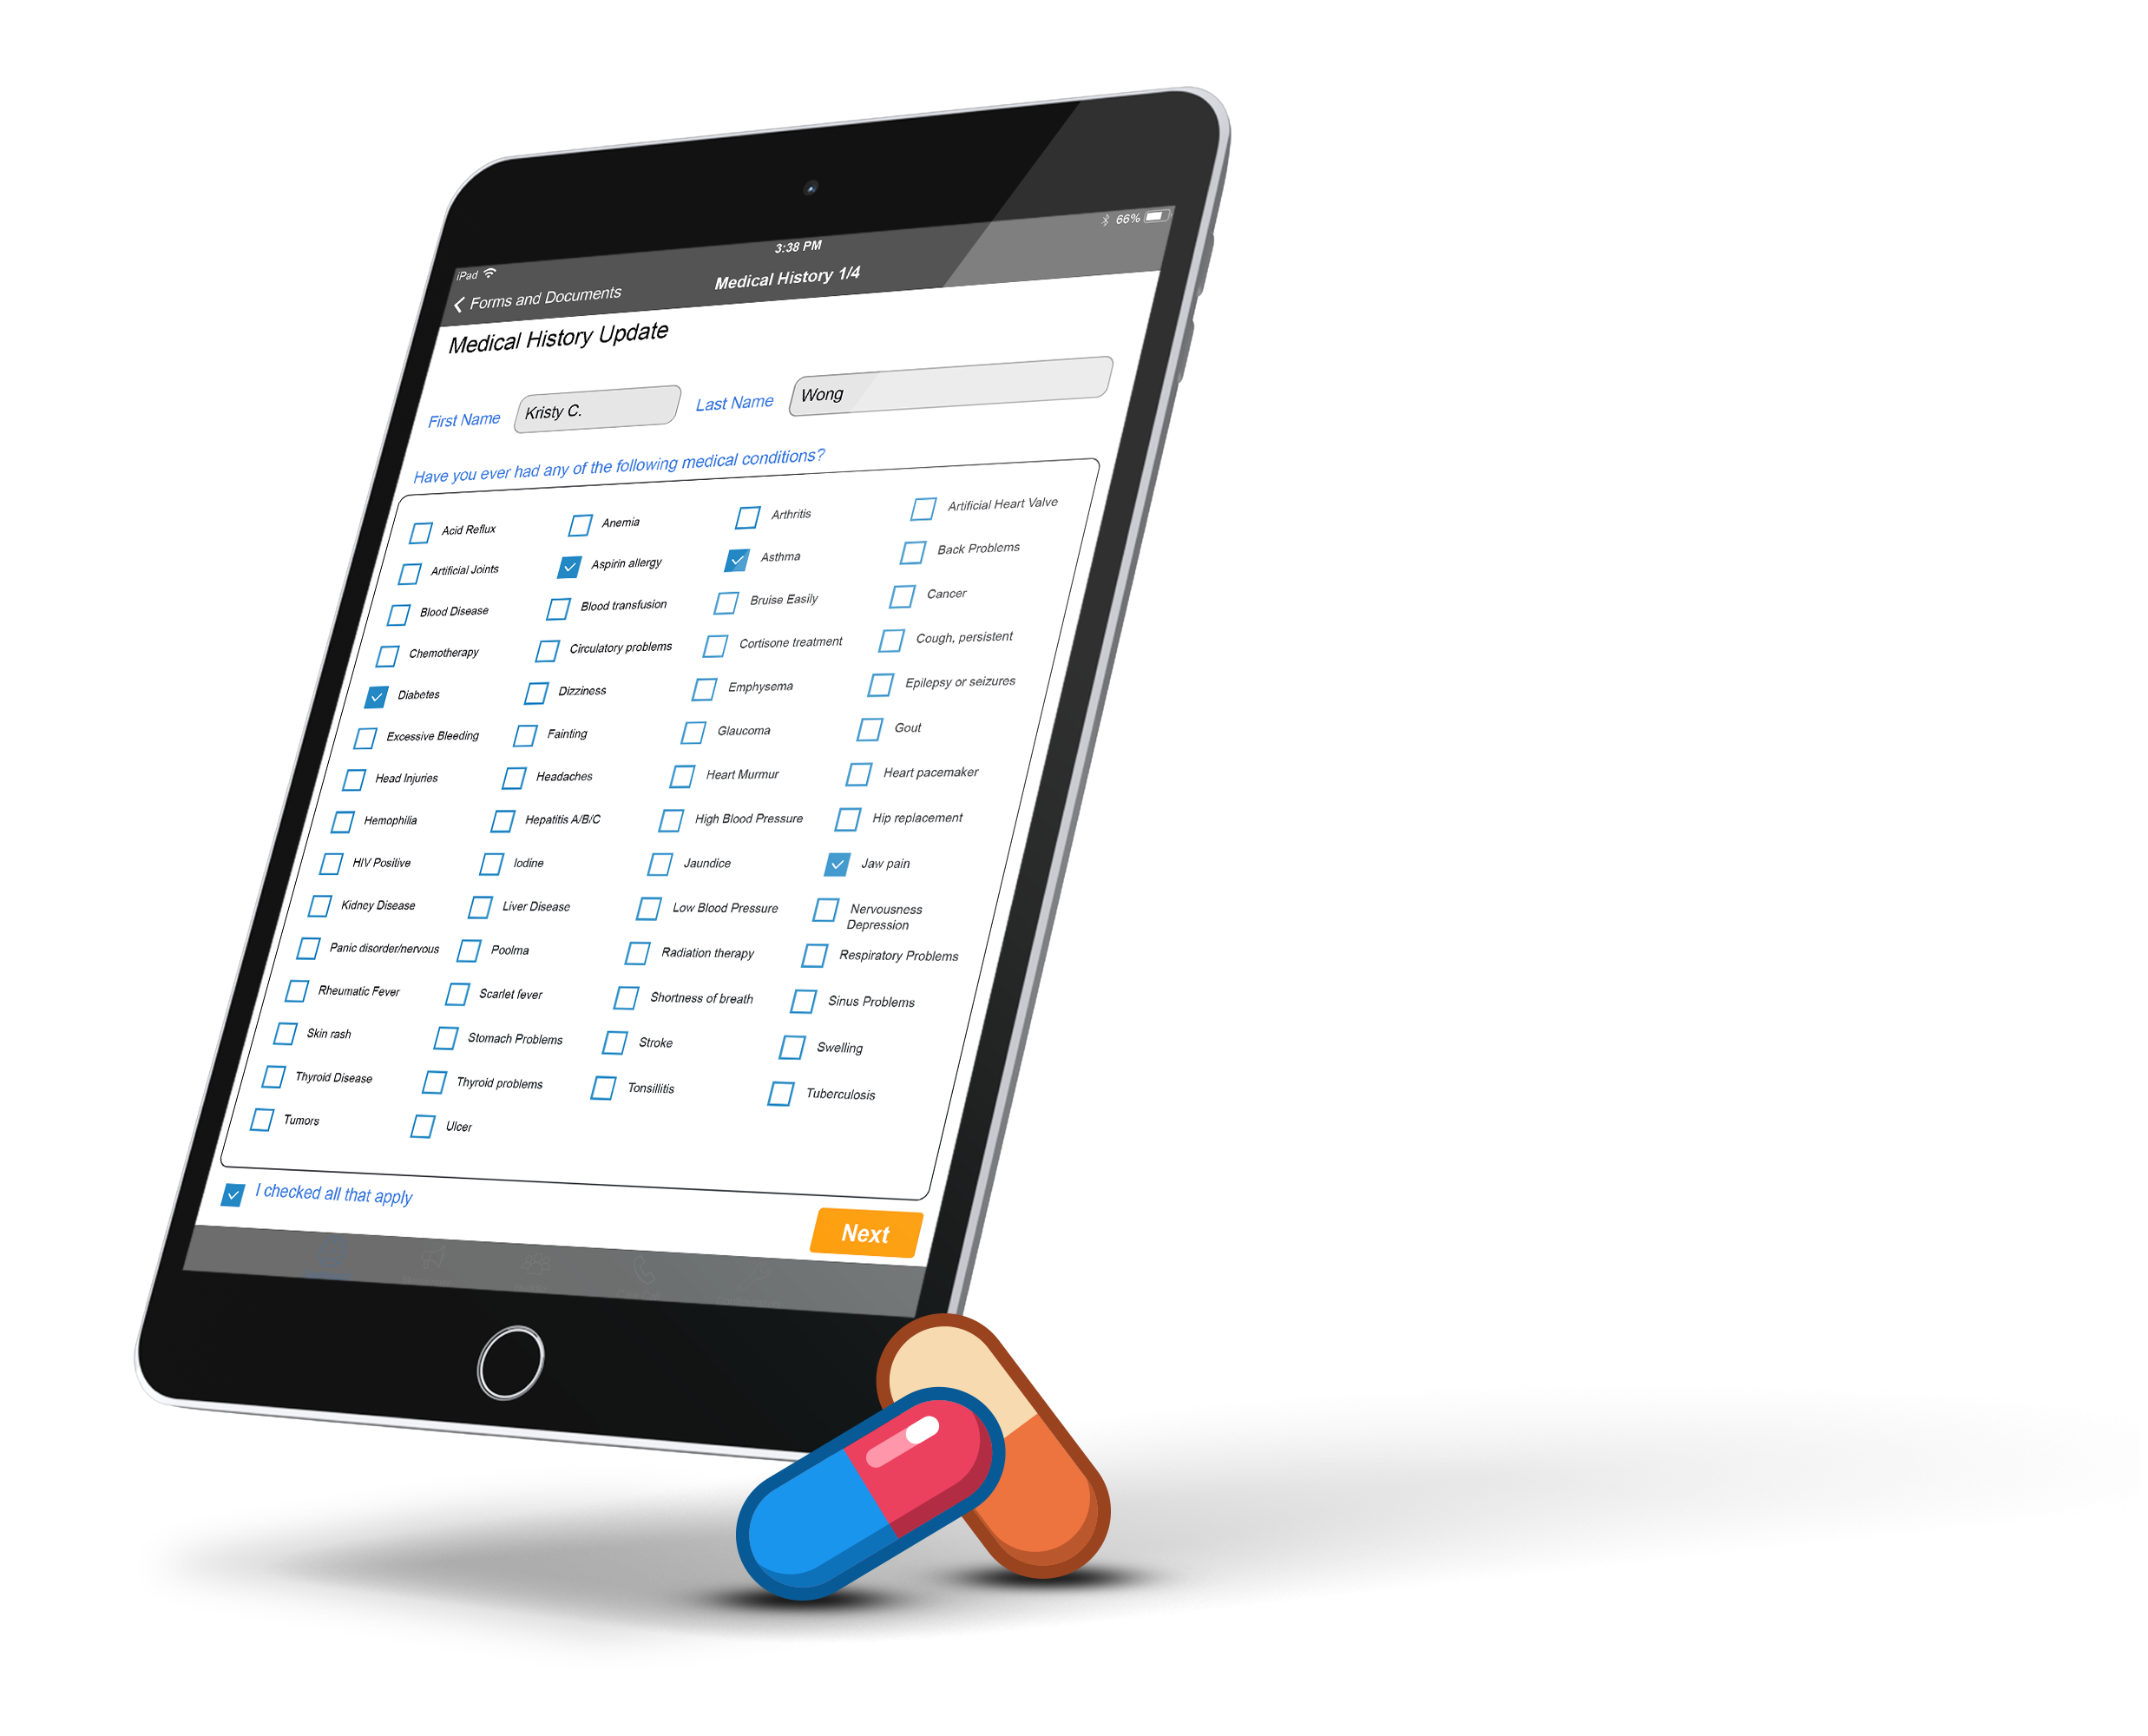 YAPI Software - Update medical history in real-time with iPad forms that auto-import data and signed PDFs to your practice management software